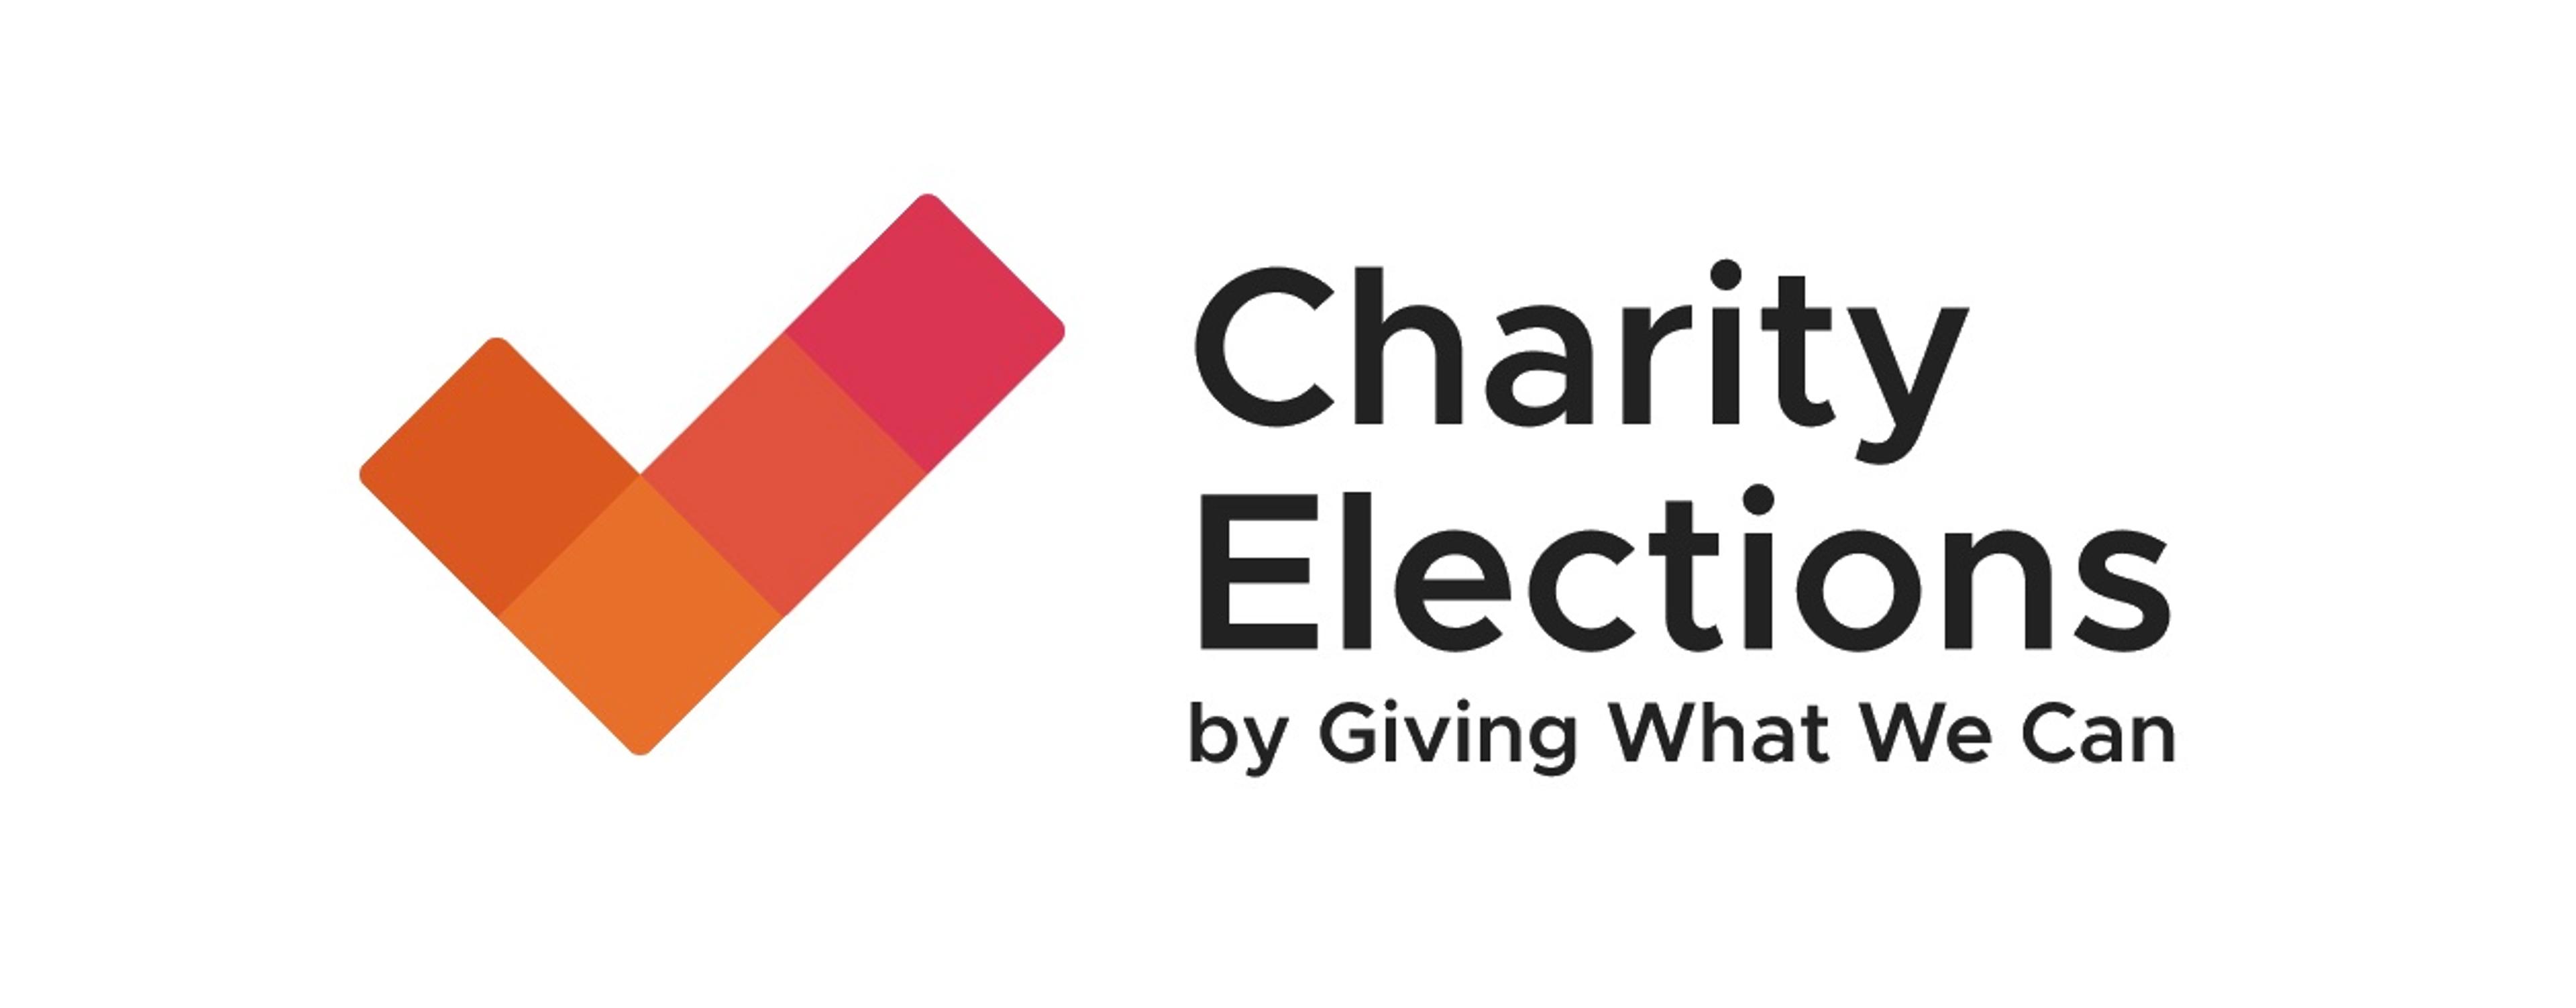 Election Candidate: Giving What We Can (Charity Elections)